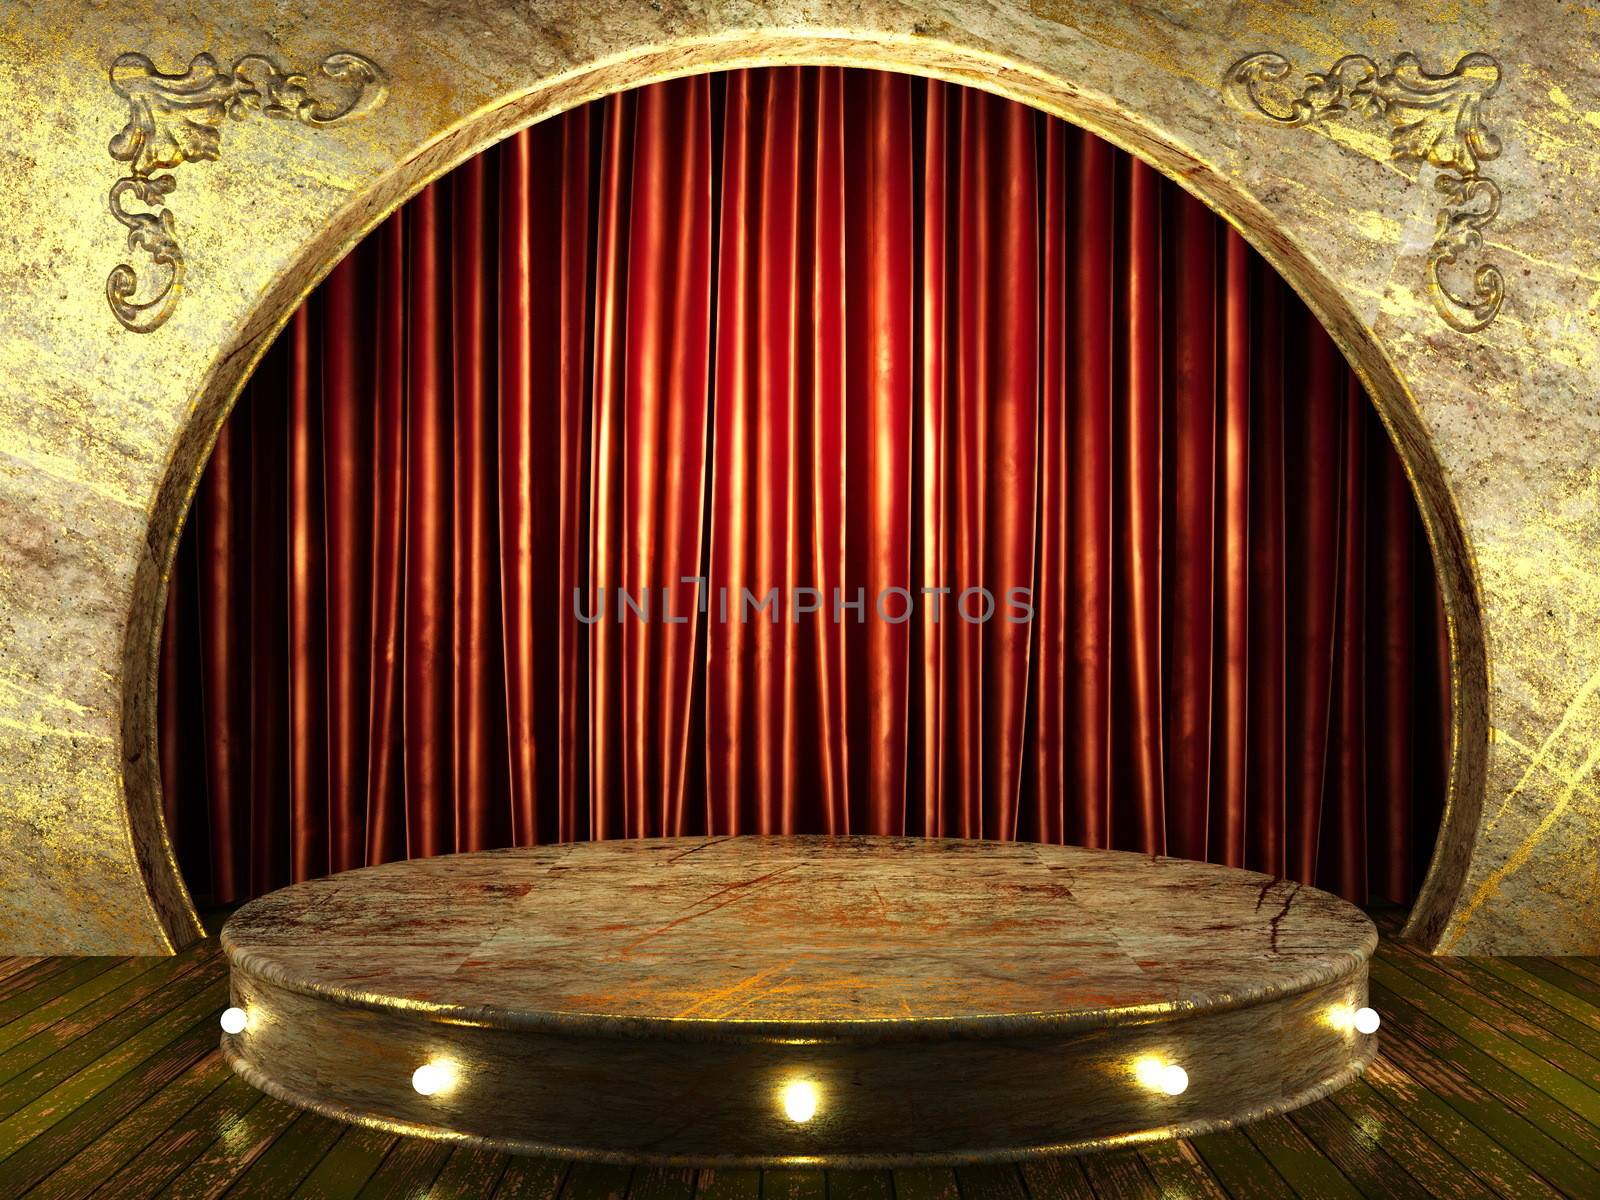 red fabric curtain on stage